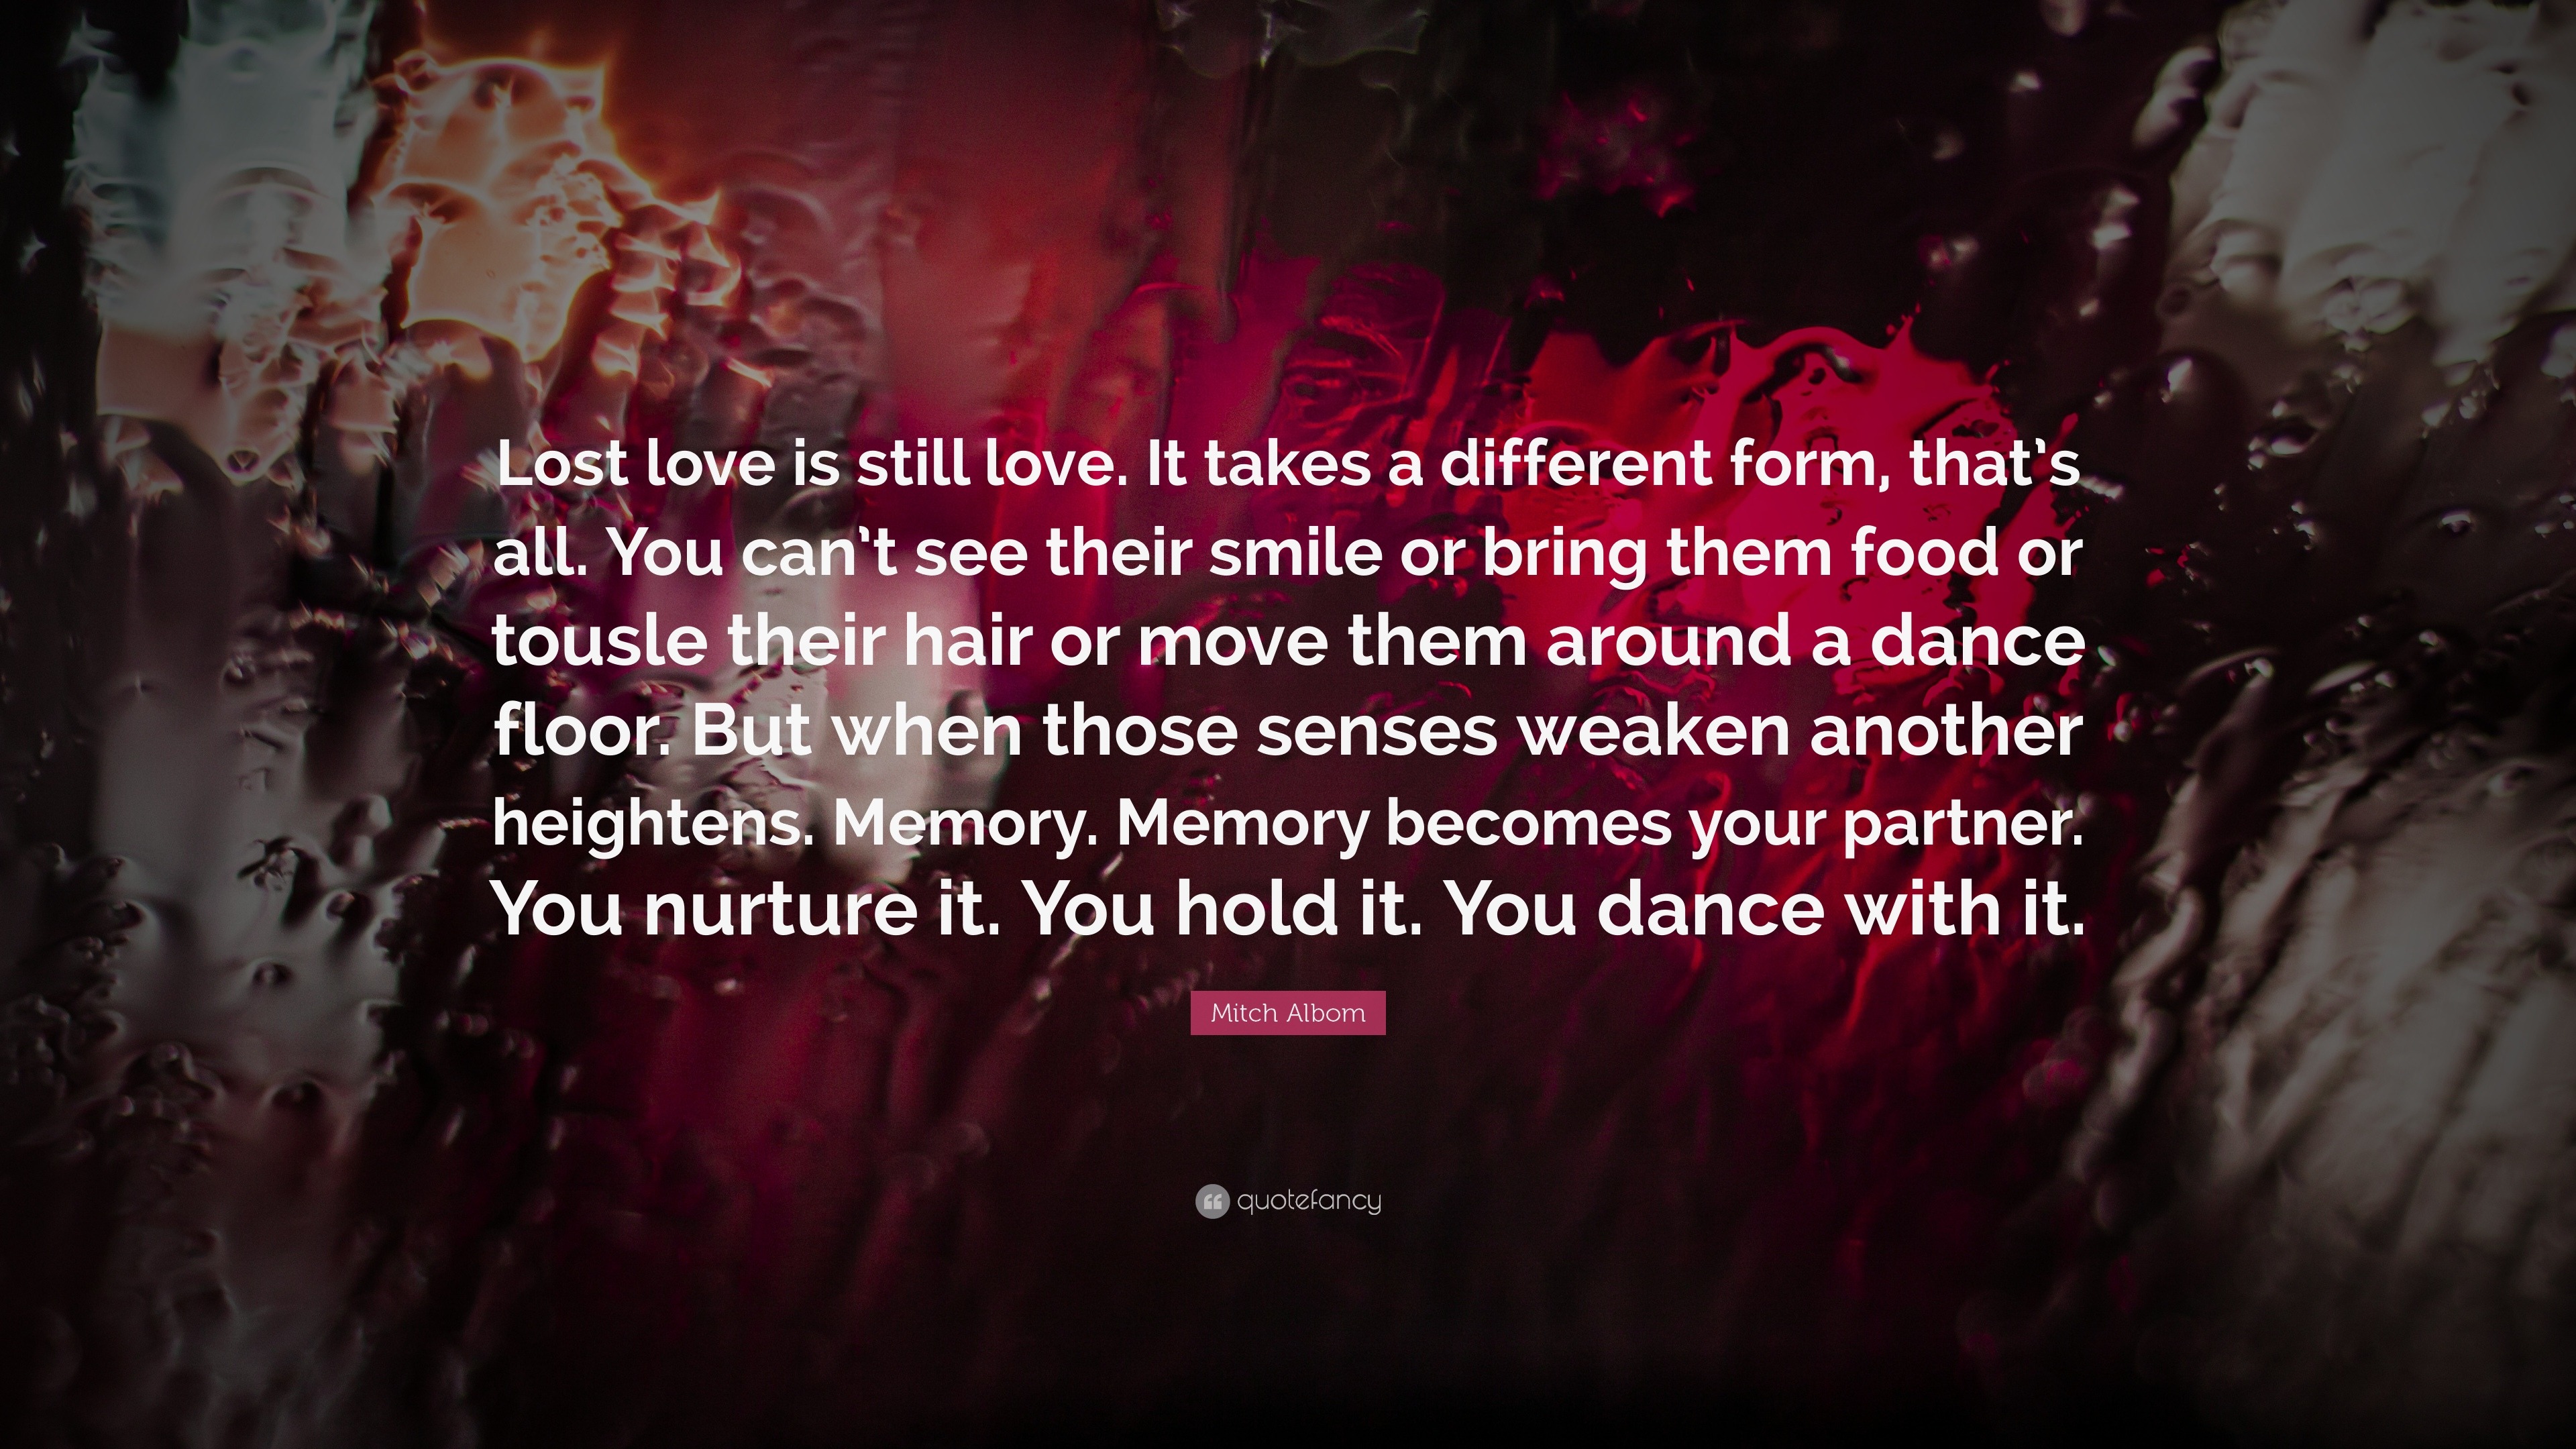 Mitch Albom Quote “Lost love is still love It takes a different form